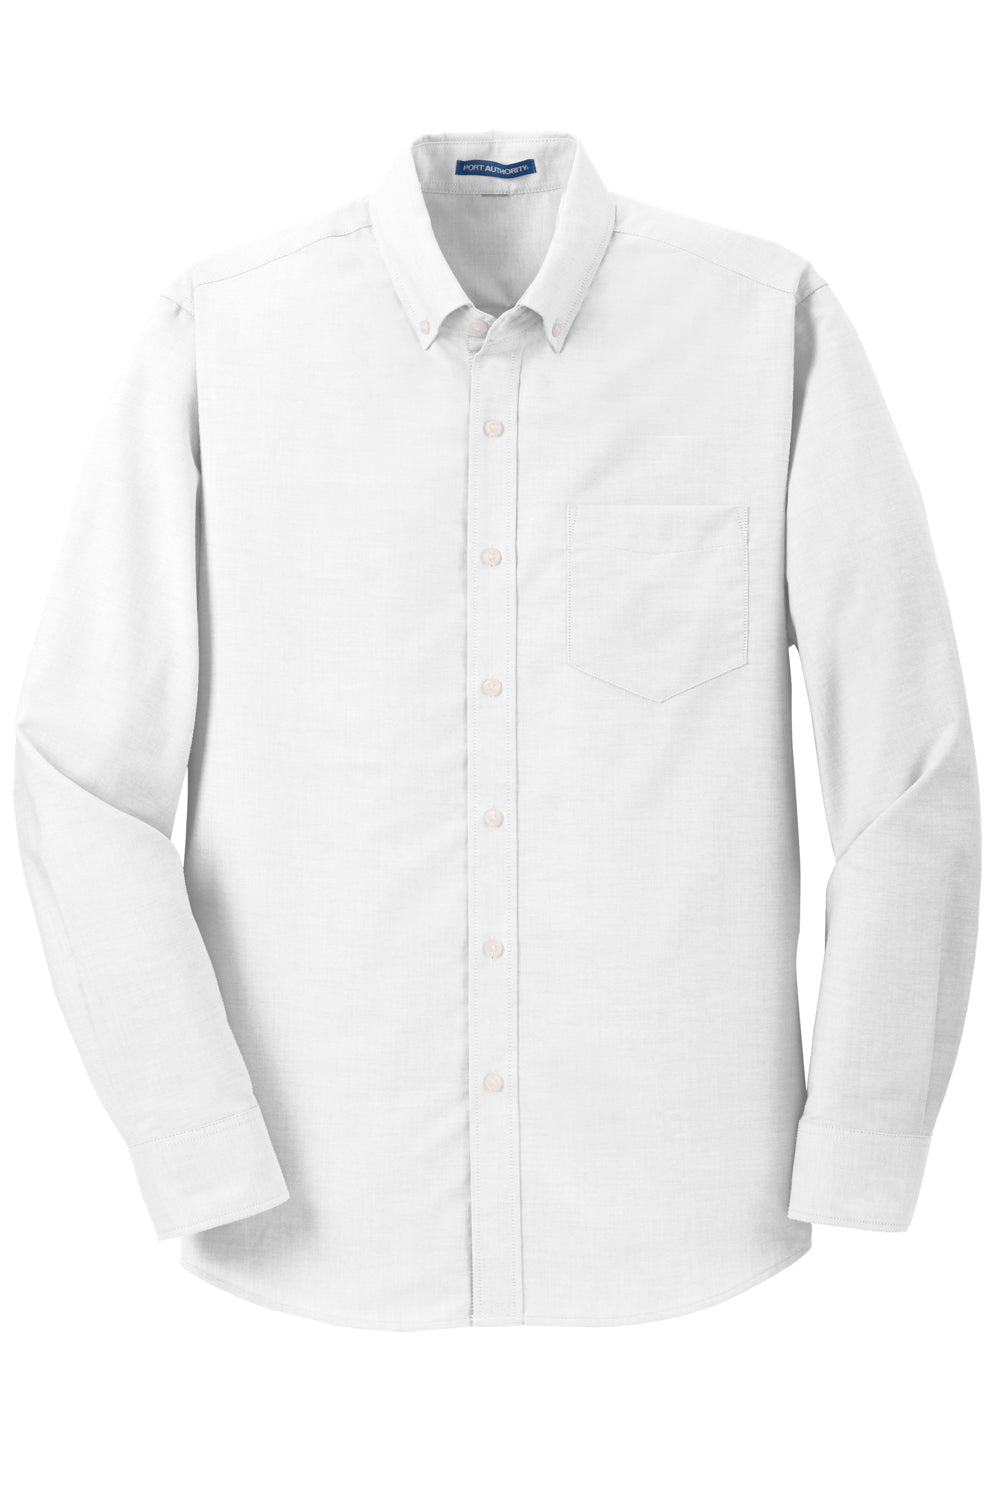 Port Authority S658/TS658 SuperPro Oxford Wrinkle Resistant Long Sleeve Button Down Shirt w/ Pocket White Flat Front